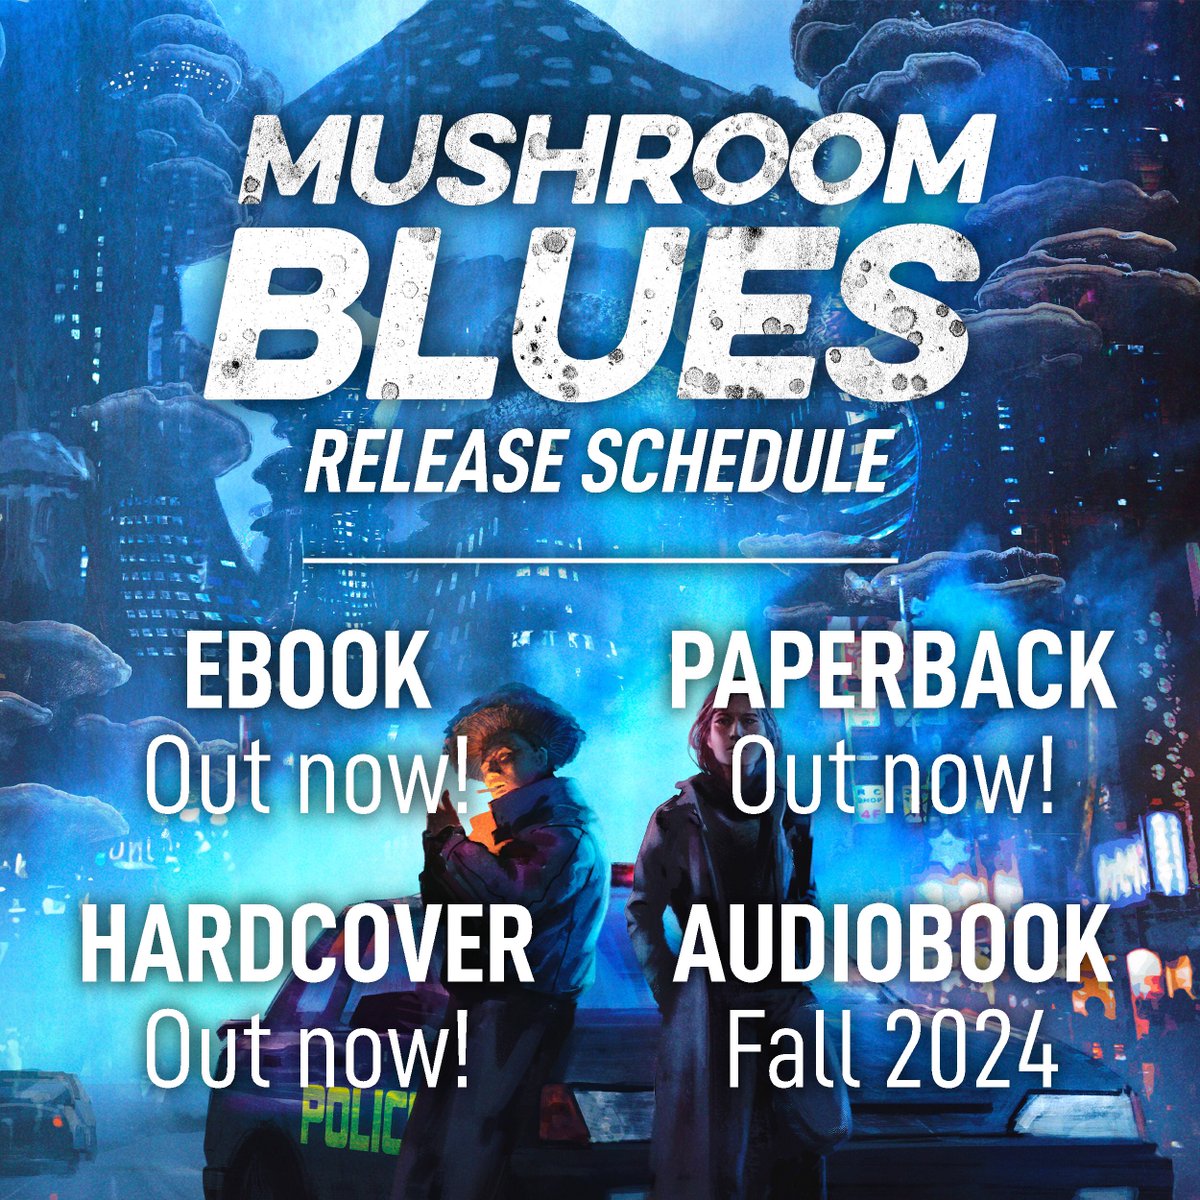 #MushroomBlues is OUT NOW in paperback/hardcover/eBook, perfect for fans of:
🍄 Fungi
🔎 Police procedurals
🏃‍♂️ Fast pacing
👁️ Psychedelics
😱 Body horror

Paperback: amzn.to/3VoOBNF
Hardcover: amzn.to/3vs5nAO
eBook/KU: a.co/d/fIKaQ9q
Audiobook (Fall 2024)